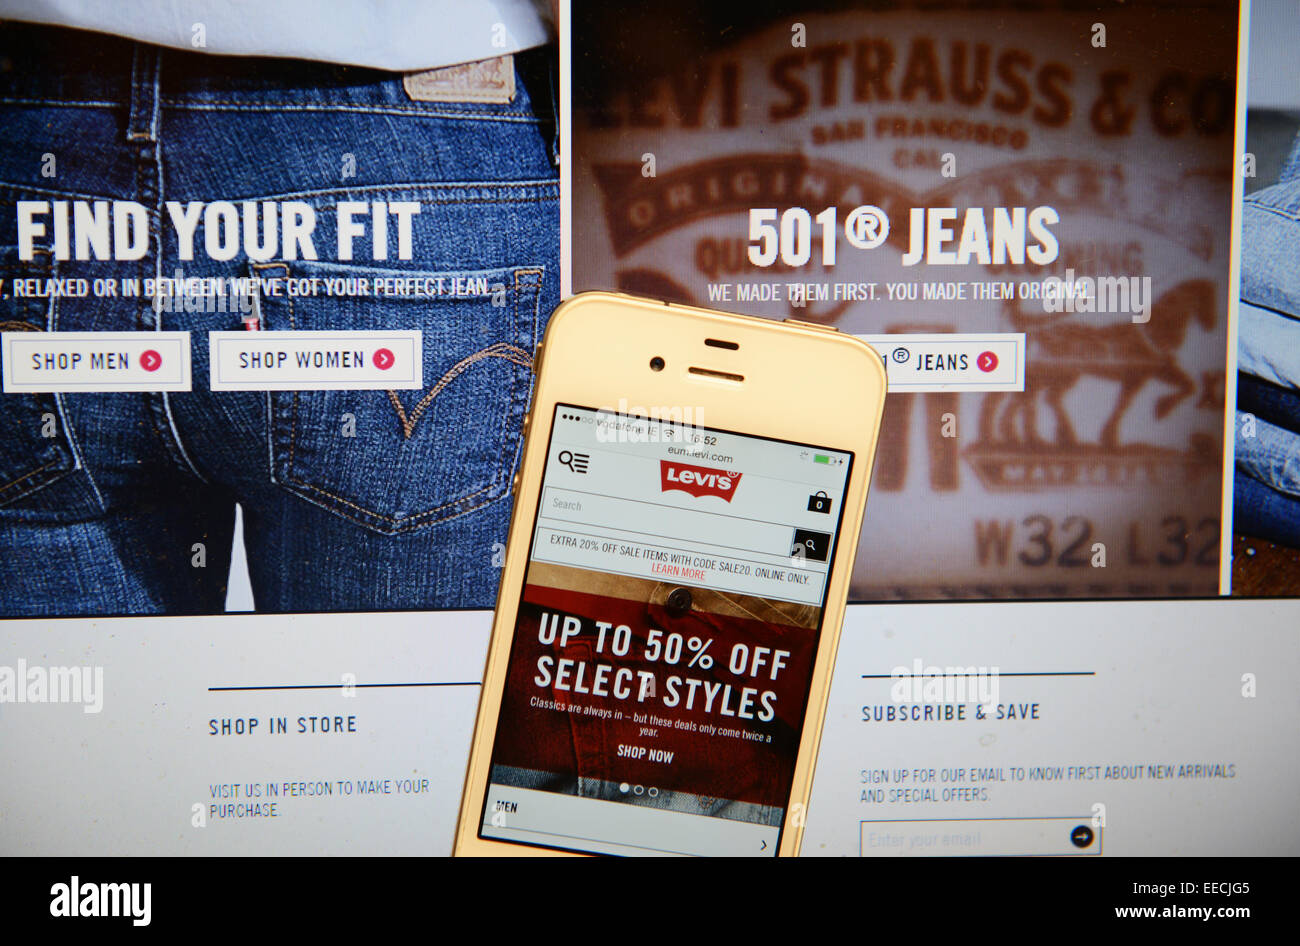 Levis Website and IPhone Stock Photo - Alamy